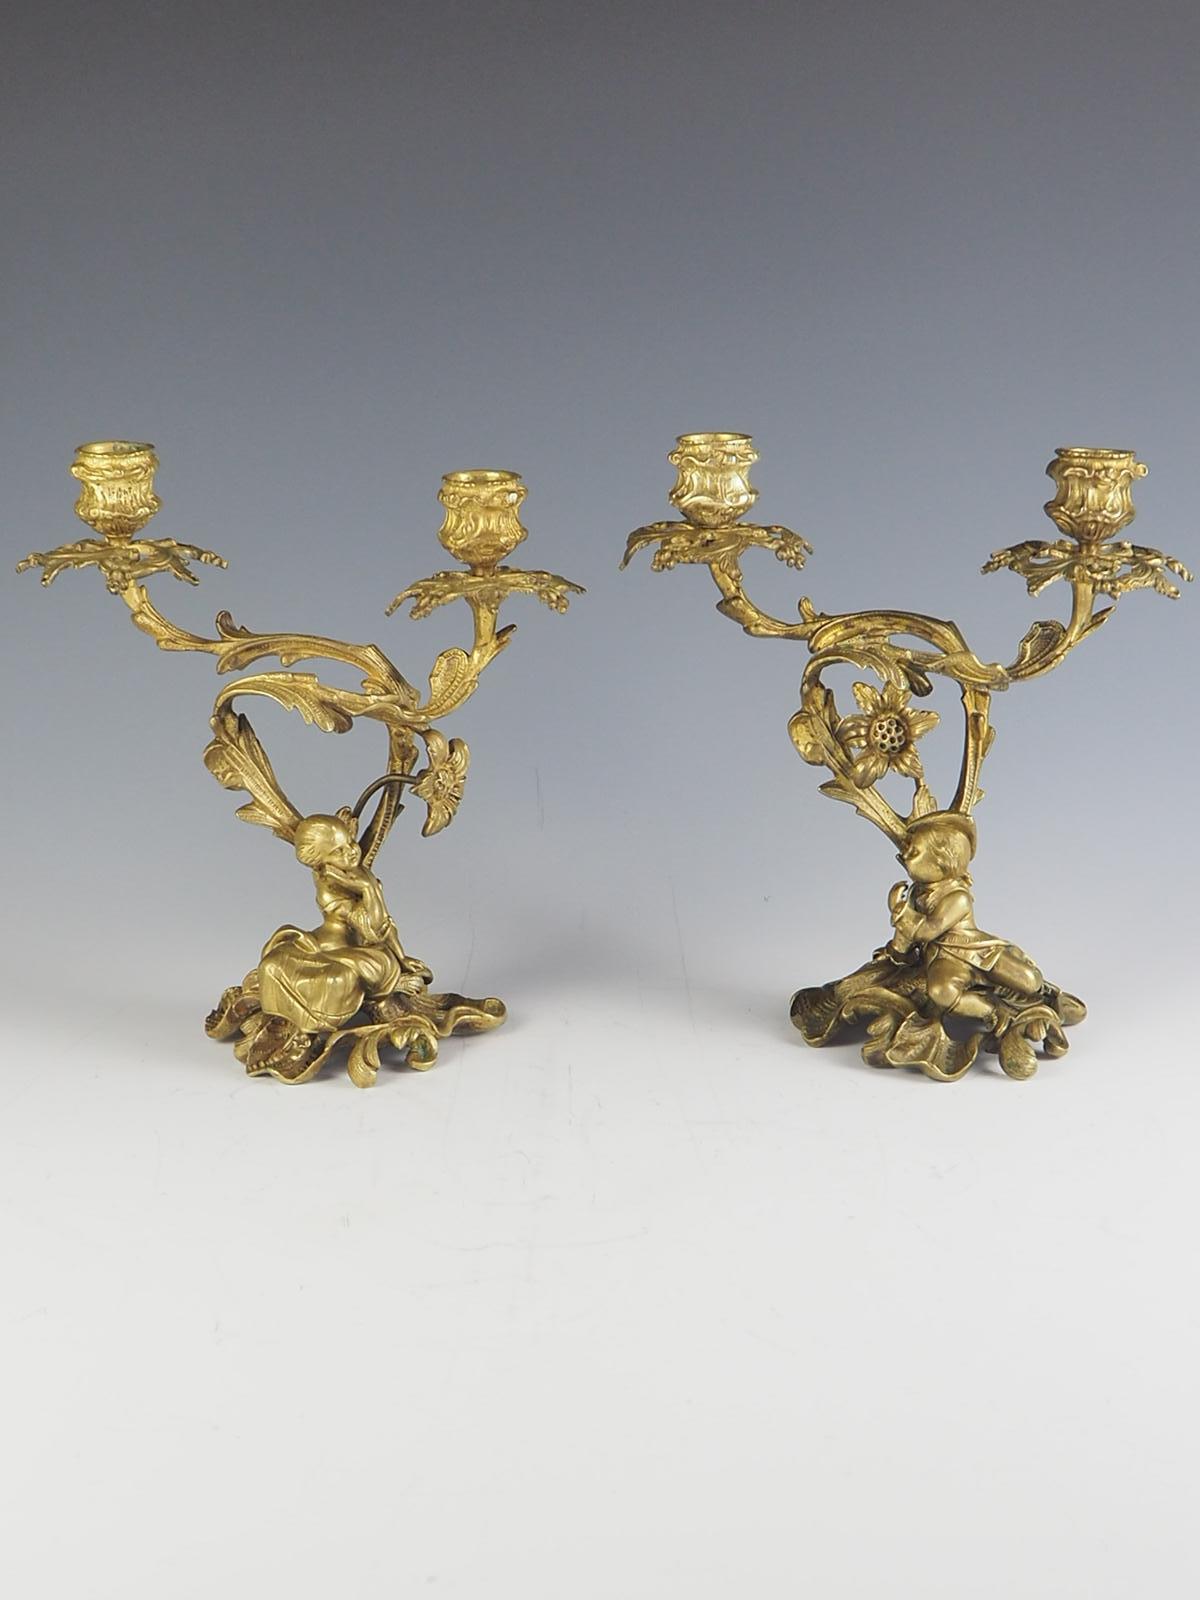 Pair of 19th Century Rococo Revival Ormolu twin candelabra

Young courting couple, reclining to left and right beneath flowering branches

c.1860.